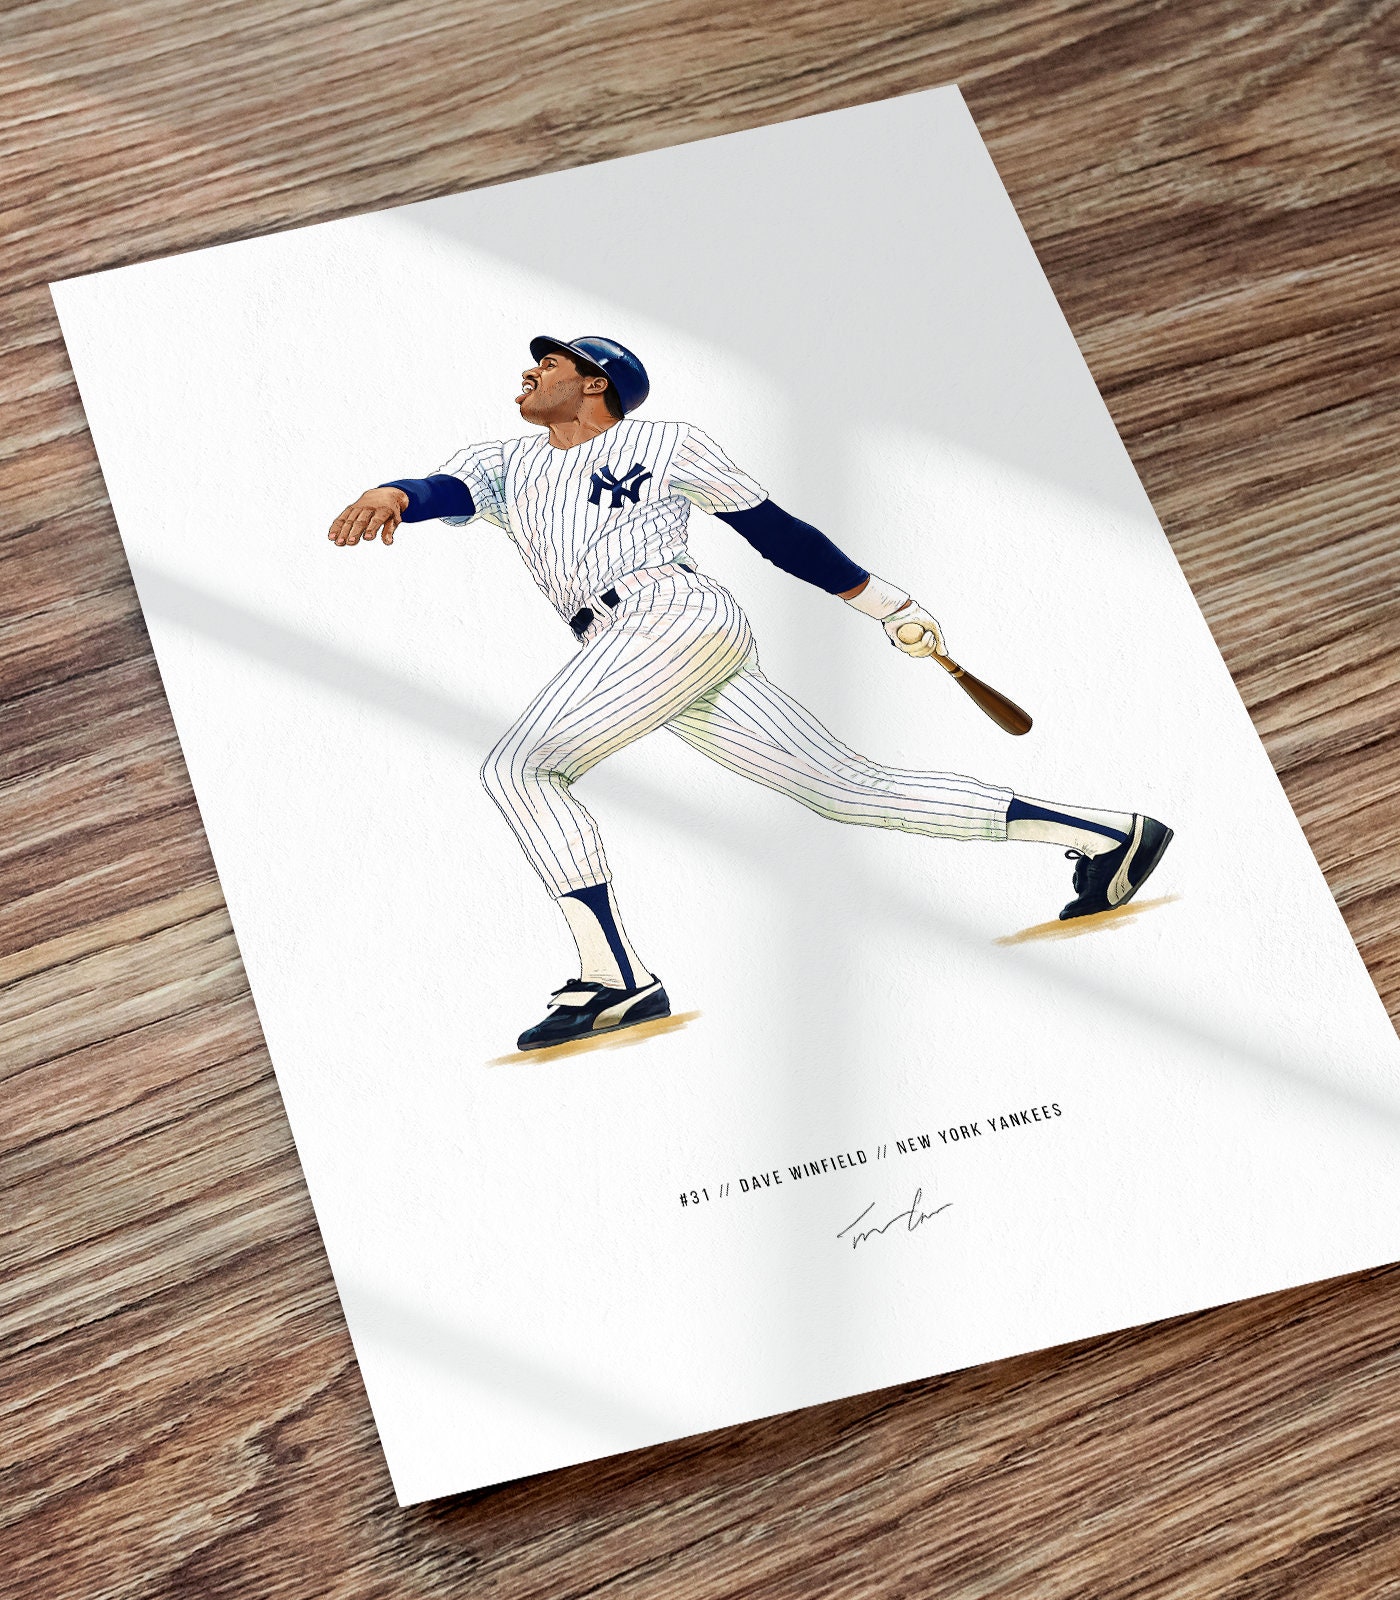 New York Yankees Dave Winfield Sports Illustrated Cover Art Print